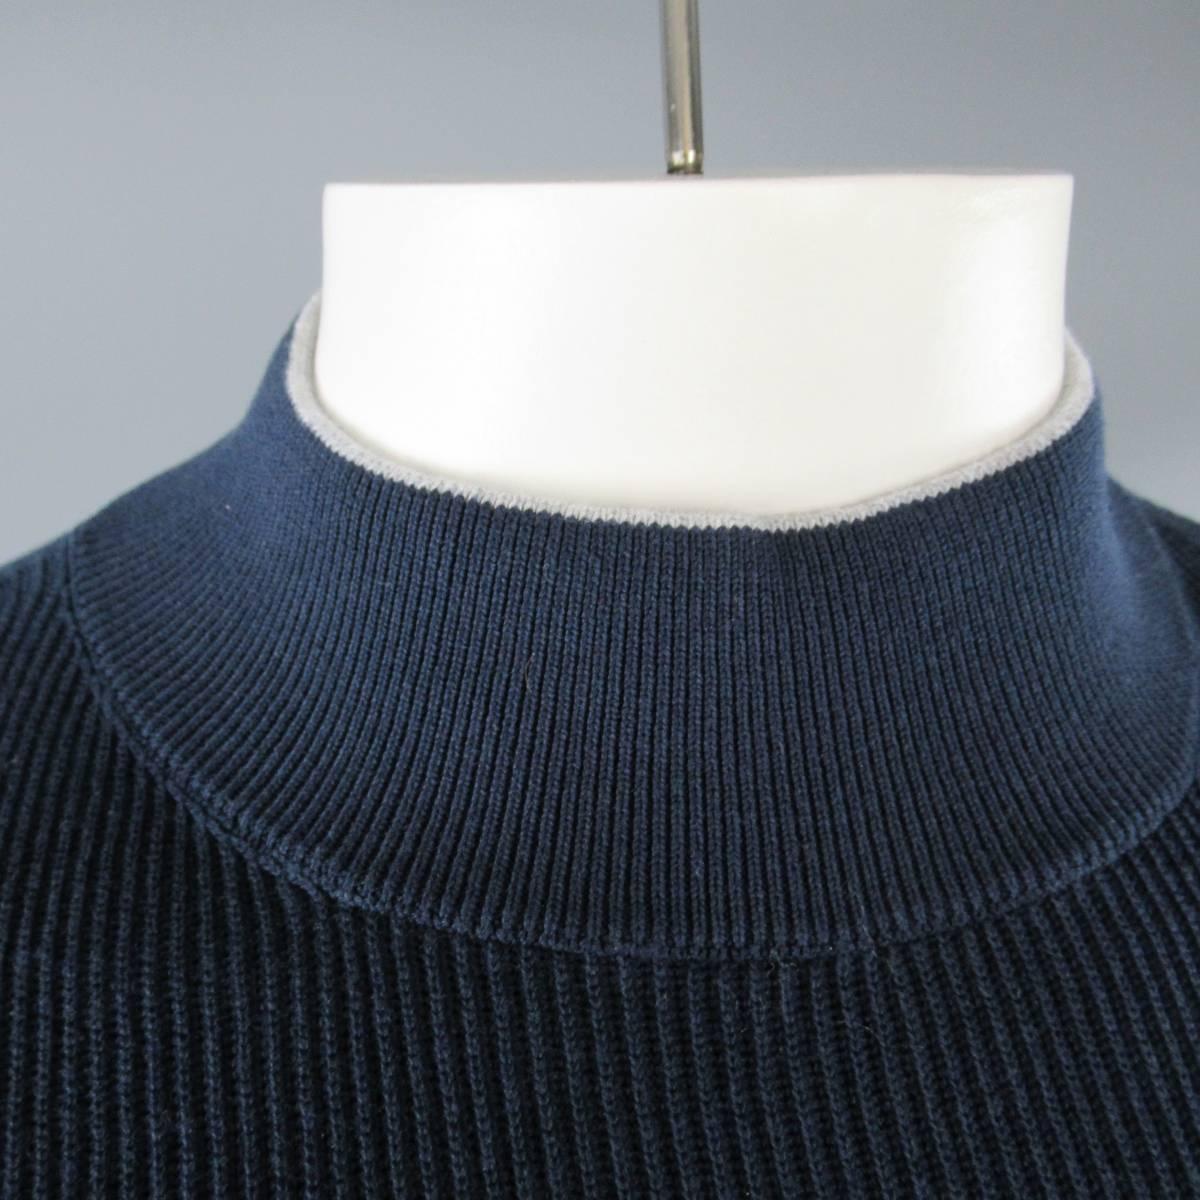 BRUNELLO CUCINELLI pullover sweater comes in navy blue ribbed cotton knit with a high mock neck, slit waist band and gray trim. Made in Italy.
 
New with Tags
Marked: 52
 
Measurements:
 
Shoulder: 17 in.
Chest: 44 in.
Sleeve: 27 in.
Length: 30